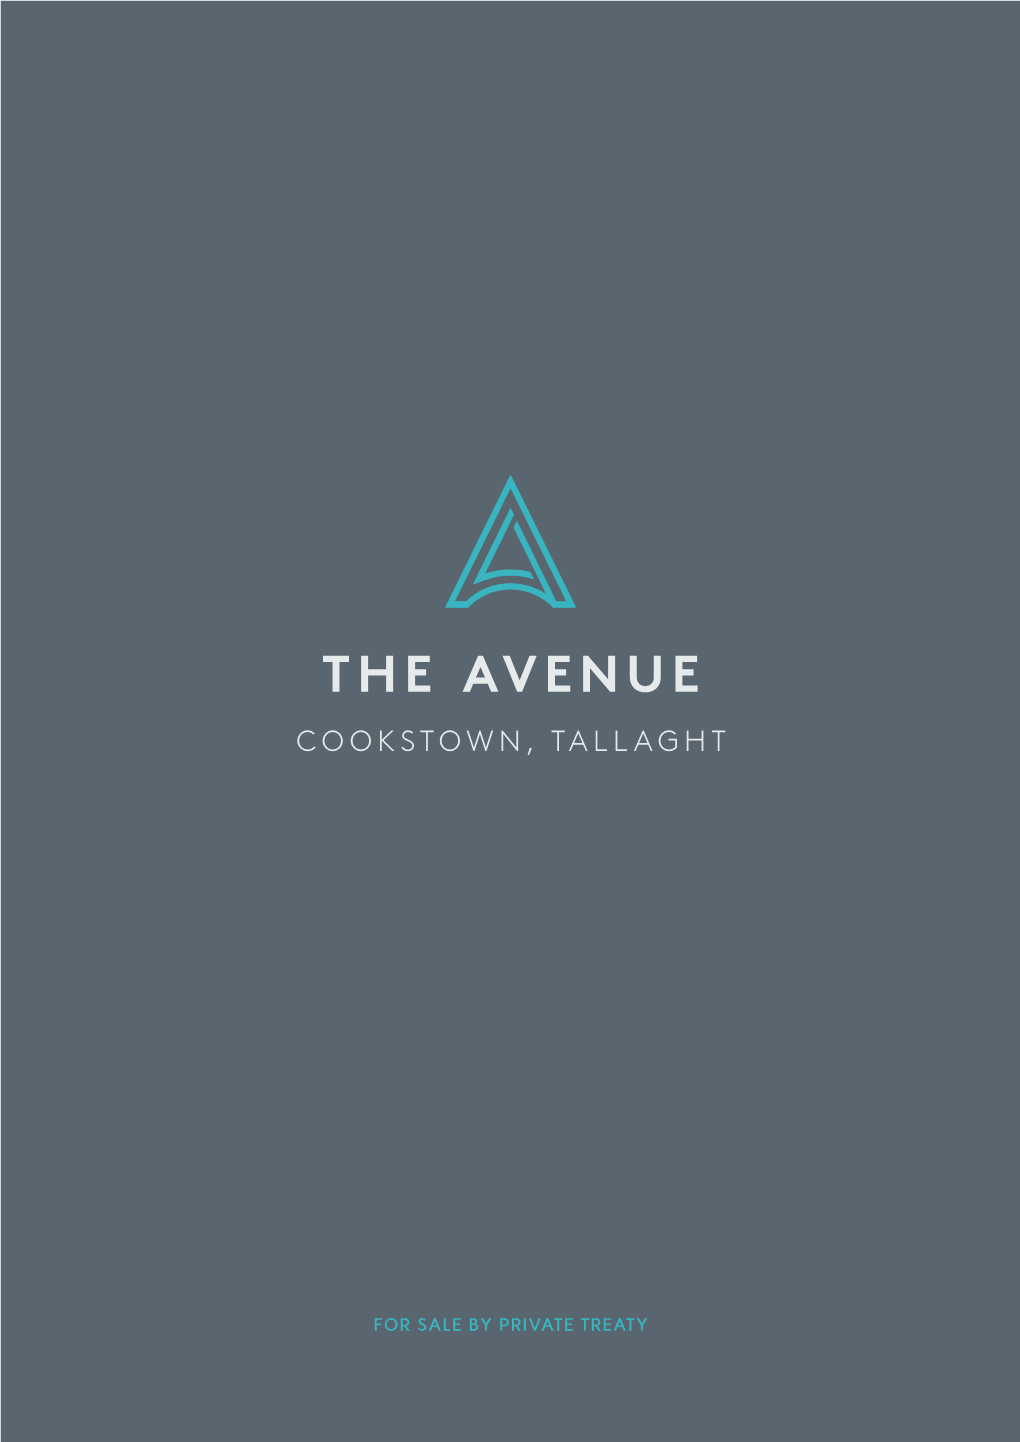 The Avenue Cookstown, Tallaght